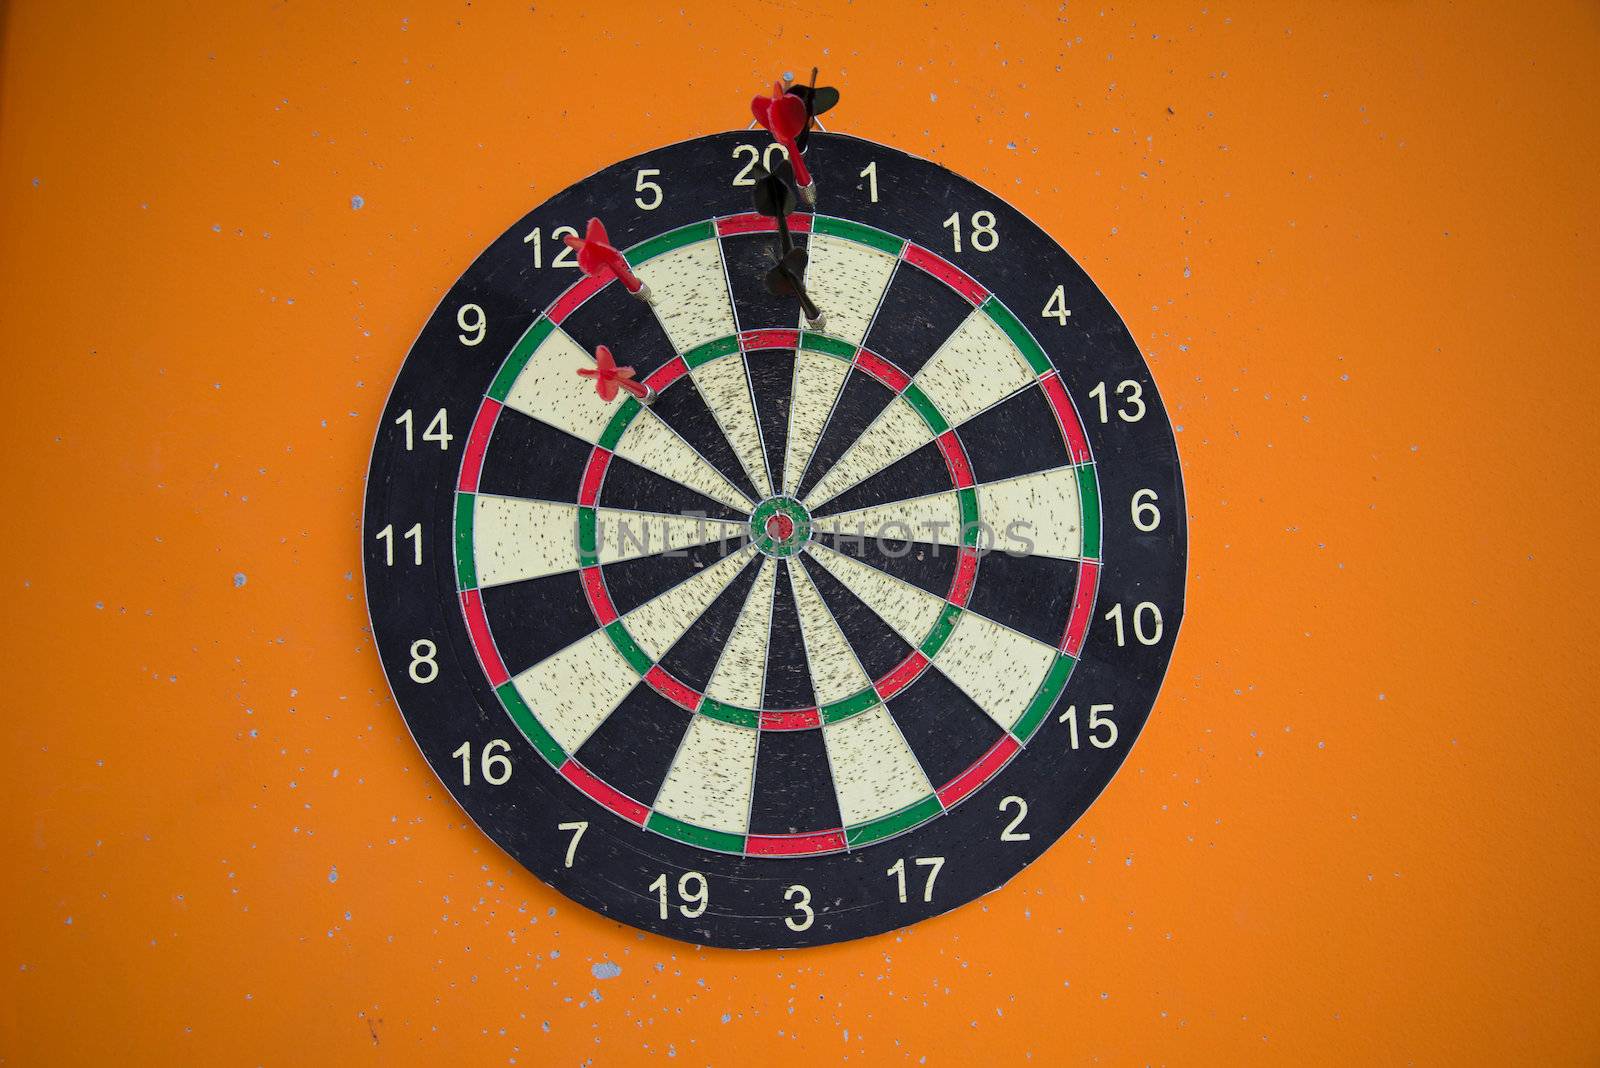 The darts on the wall in the gyms.